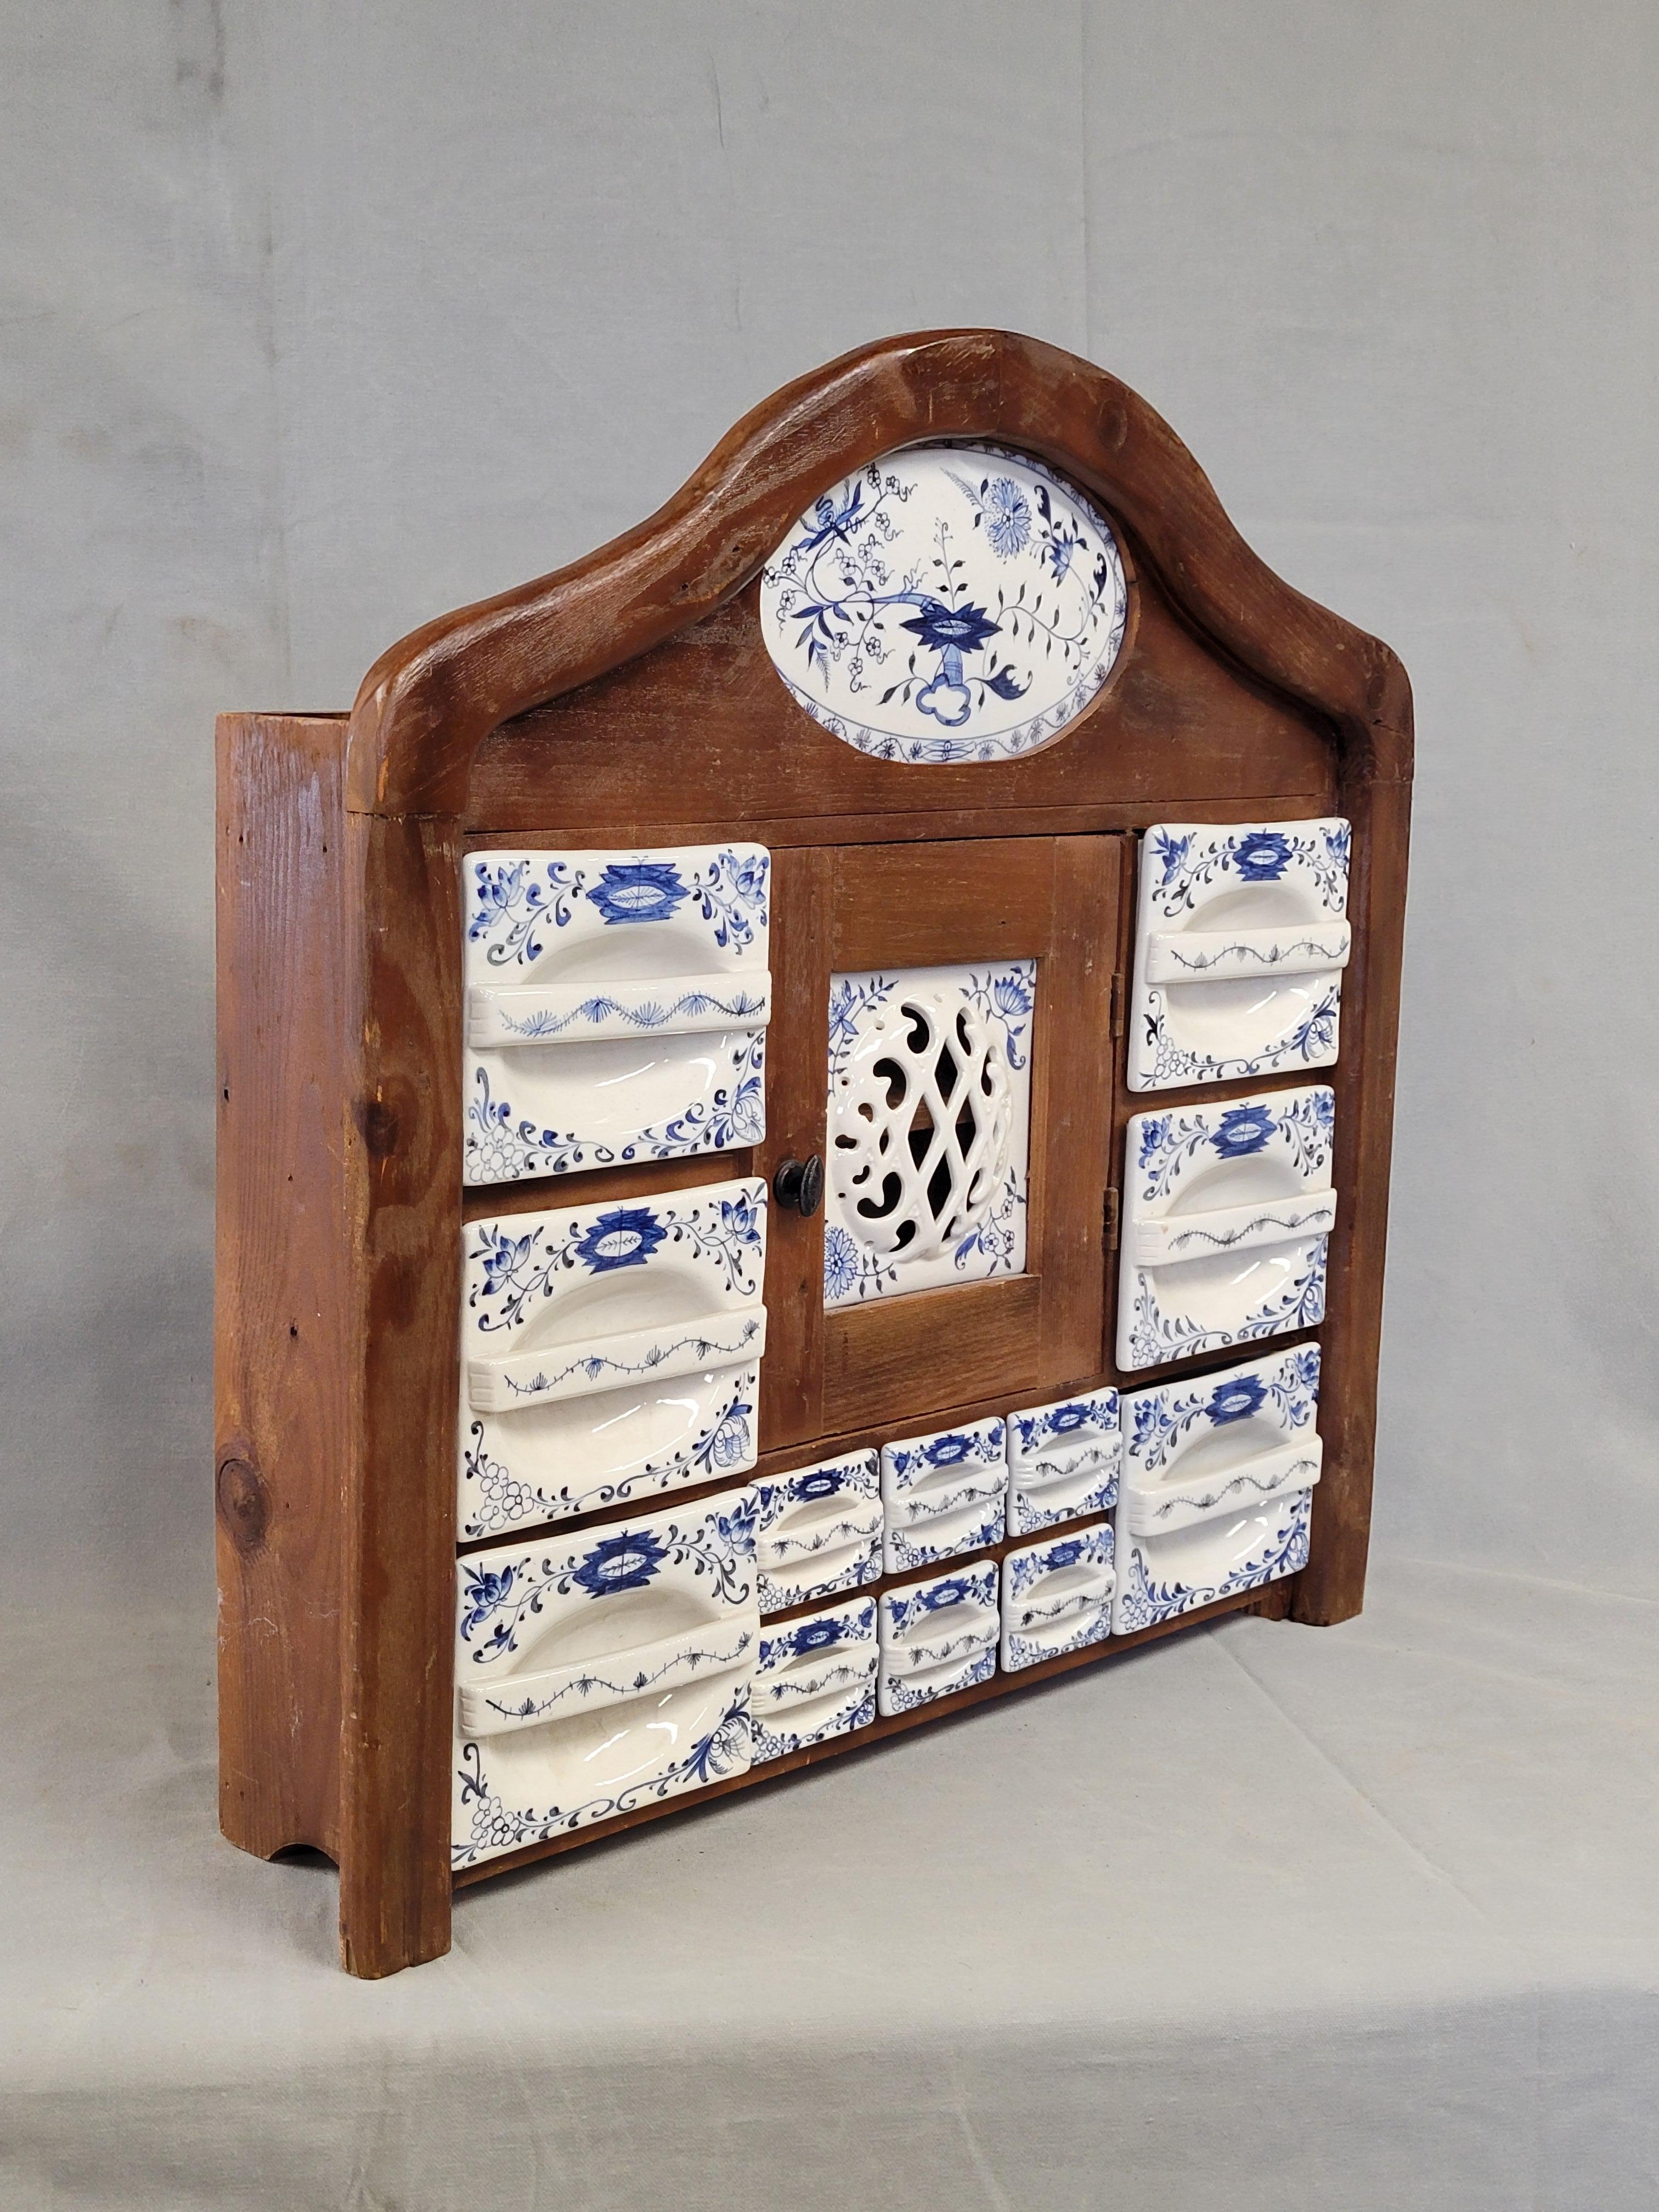 A charming vintage Dutch kitchen spice rack is made of wood and has ceramic blue and white (blue onion pattern) drawer inserts. The cabinet door opens for fresh egg storage (in Europe fresh eggs are not refrigerated). Can be hung on a wall, built